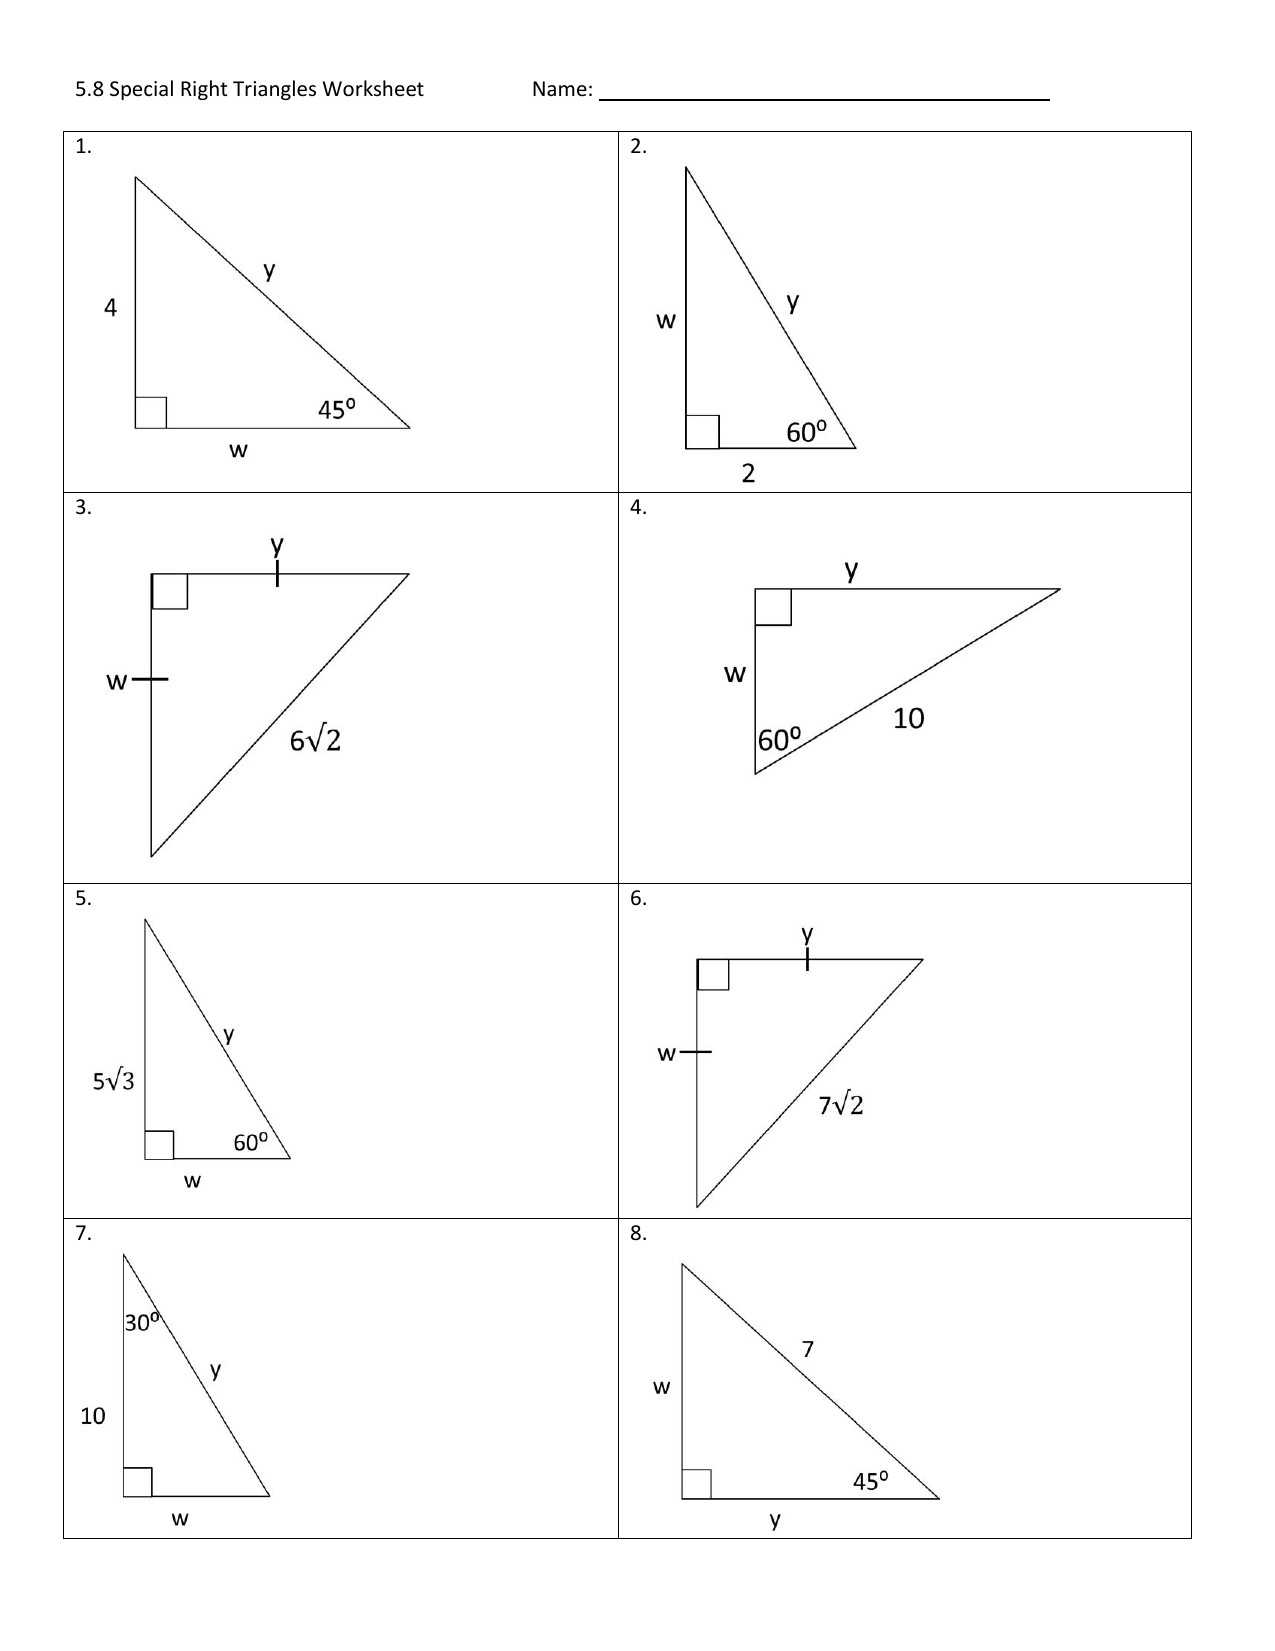 Similar Figures Worksheet Answer Key Also 24 Luxury Special Right Triangles Worksheet Answers